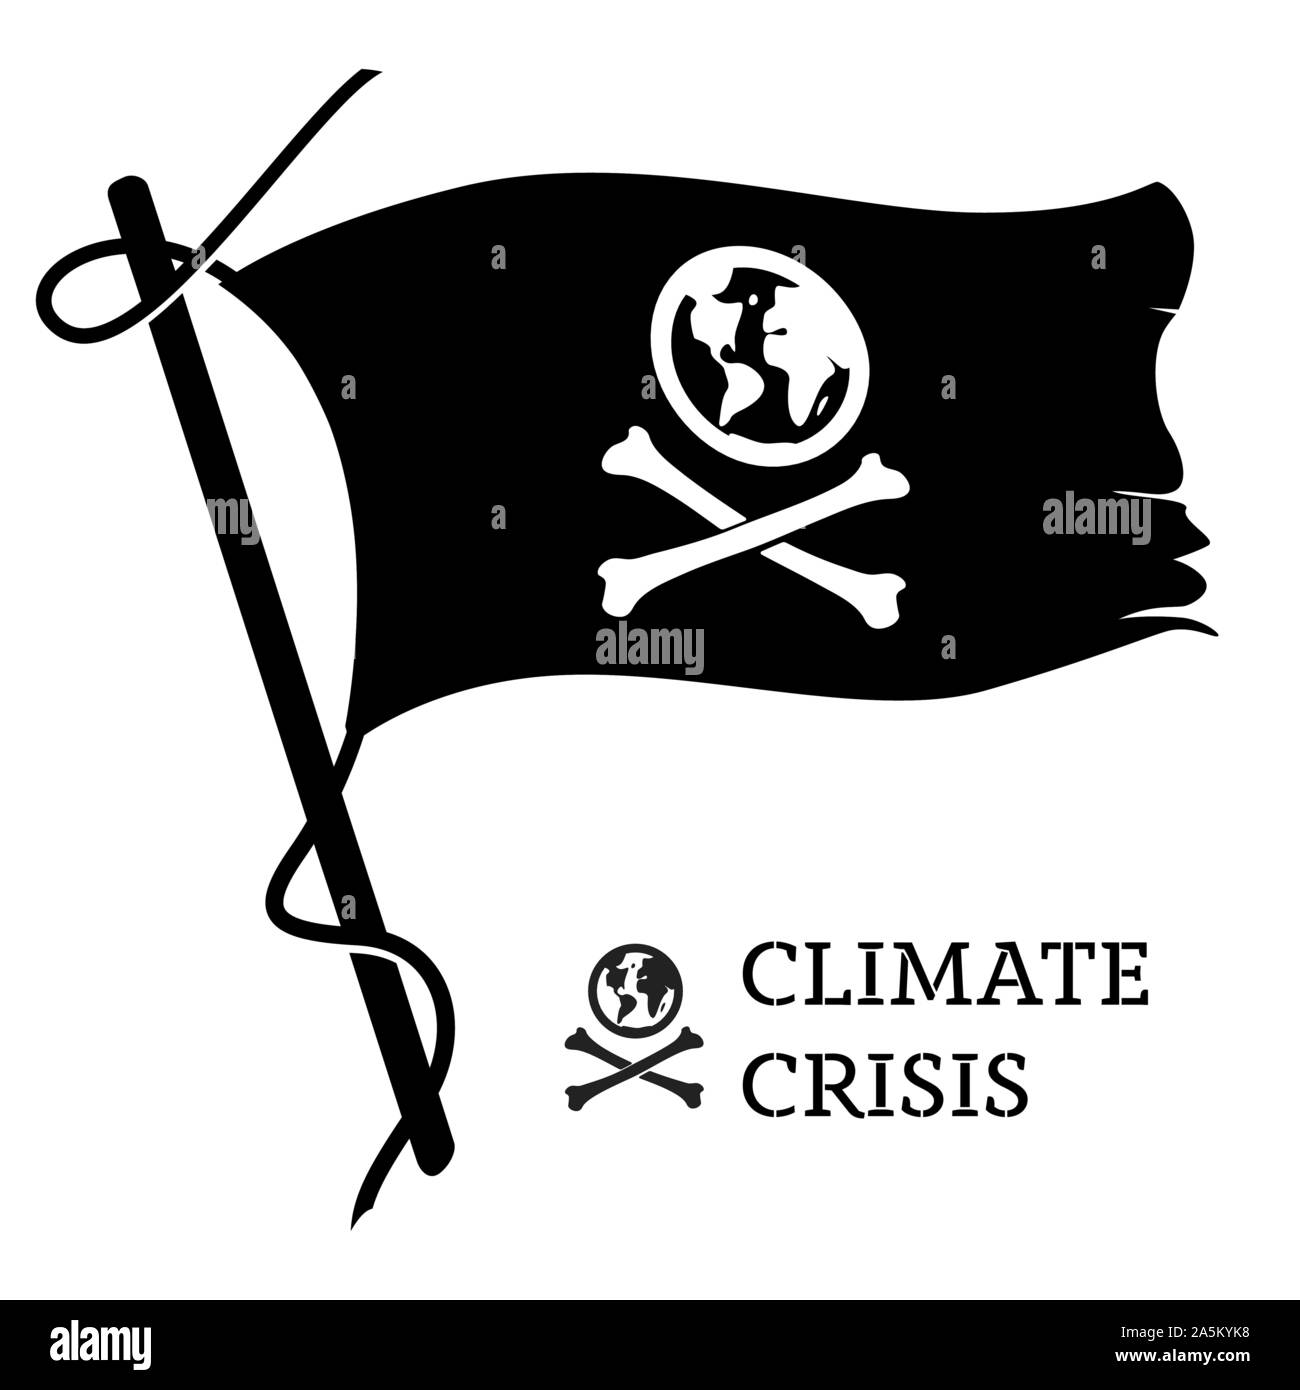 Climate crisis flag. Global warming sign as a pirate symbol. Vector illustration. Stock Vector